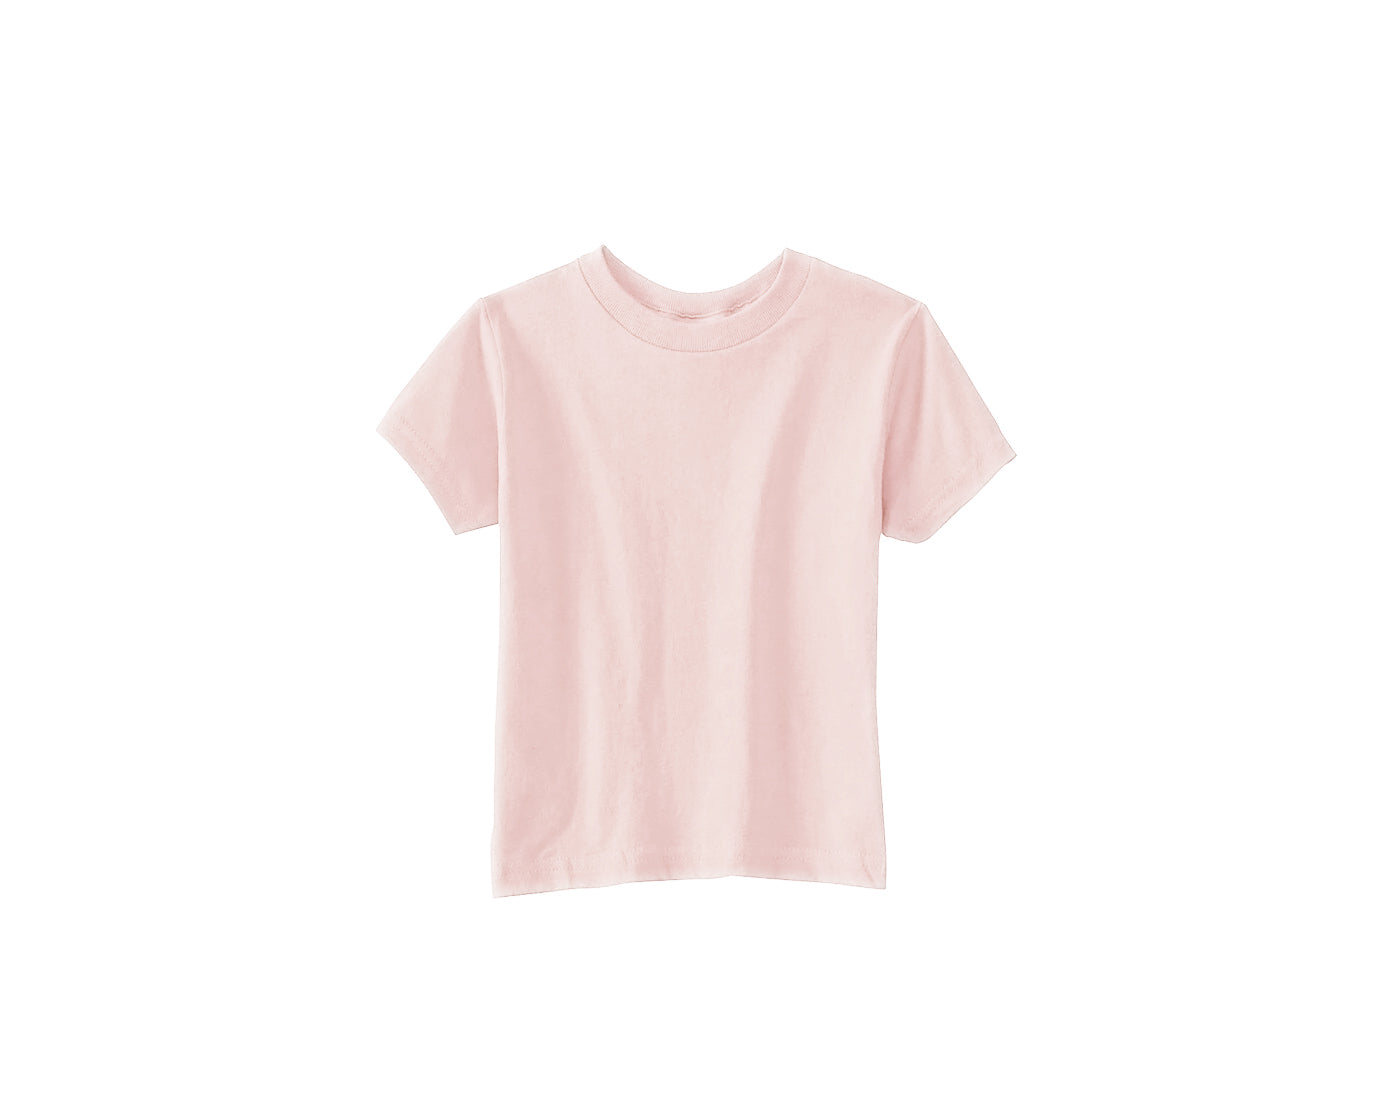 Loose-Fit Bamboo Baby / Toddler / Kids T-Shirt | Champagne